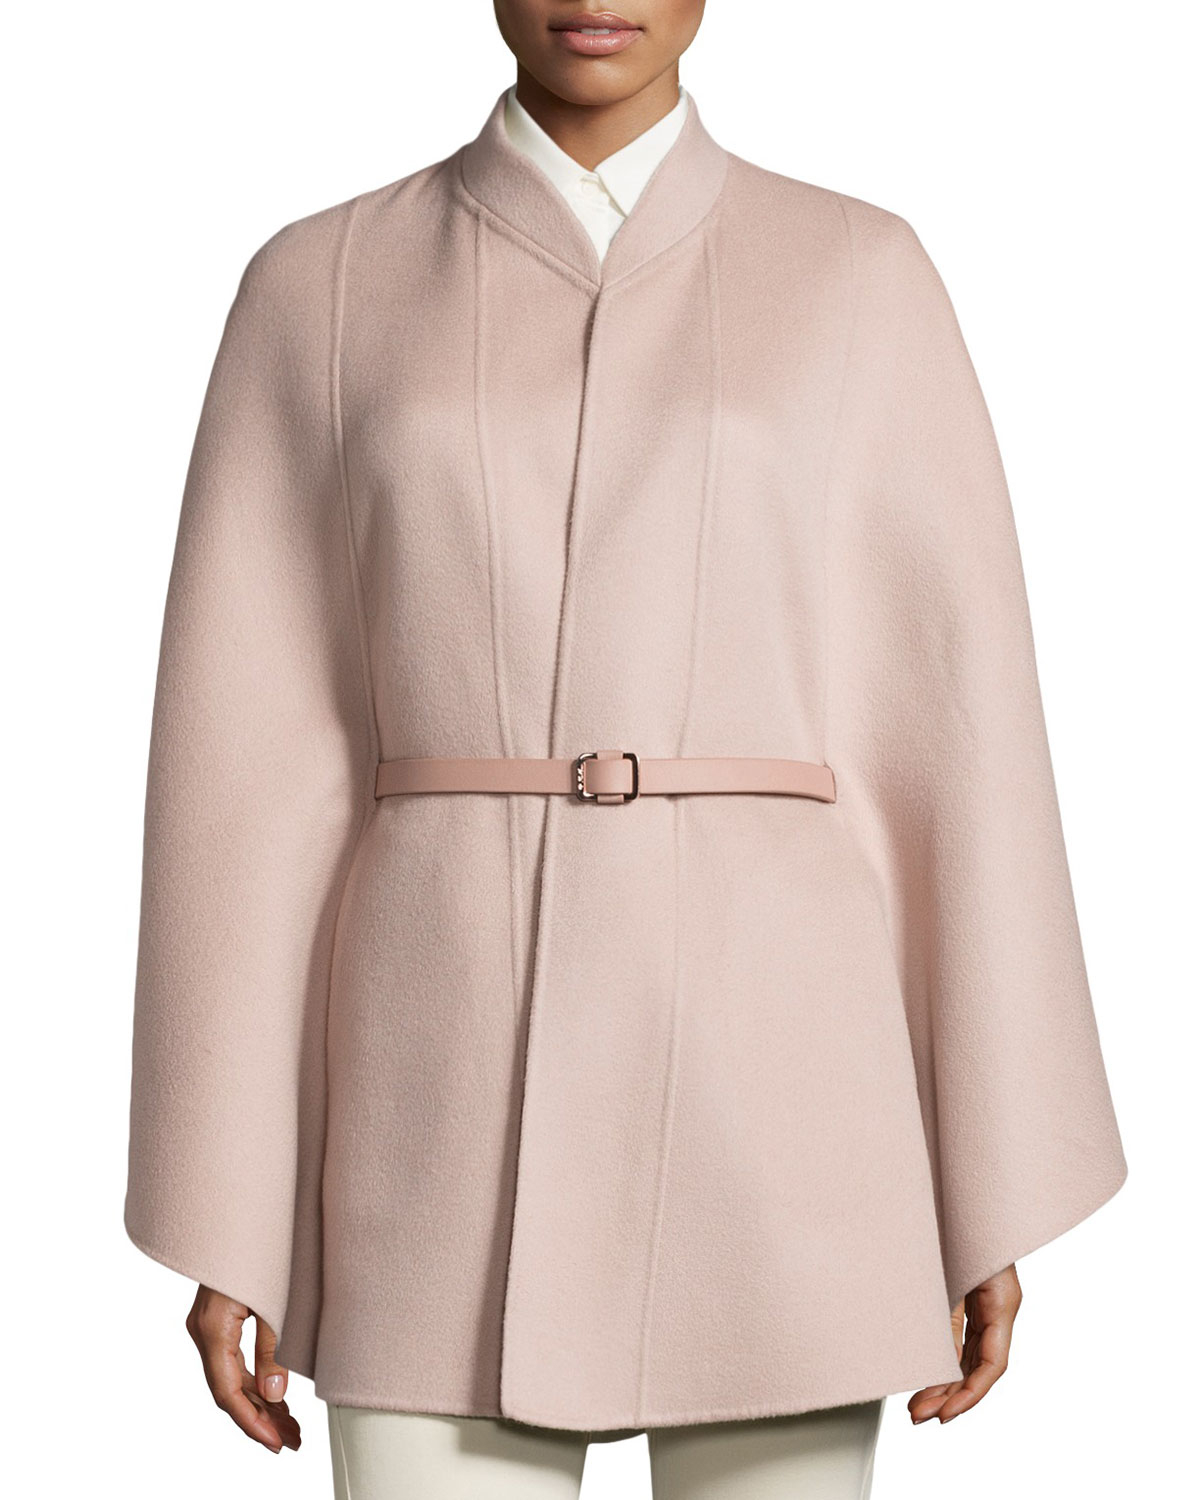 Lyst - Loro Piana Melton Baby Cashmere Cape in Pink